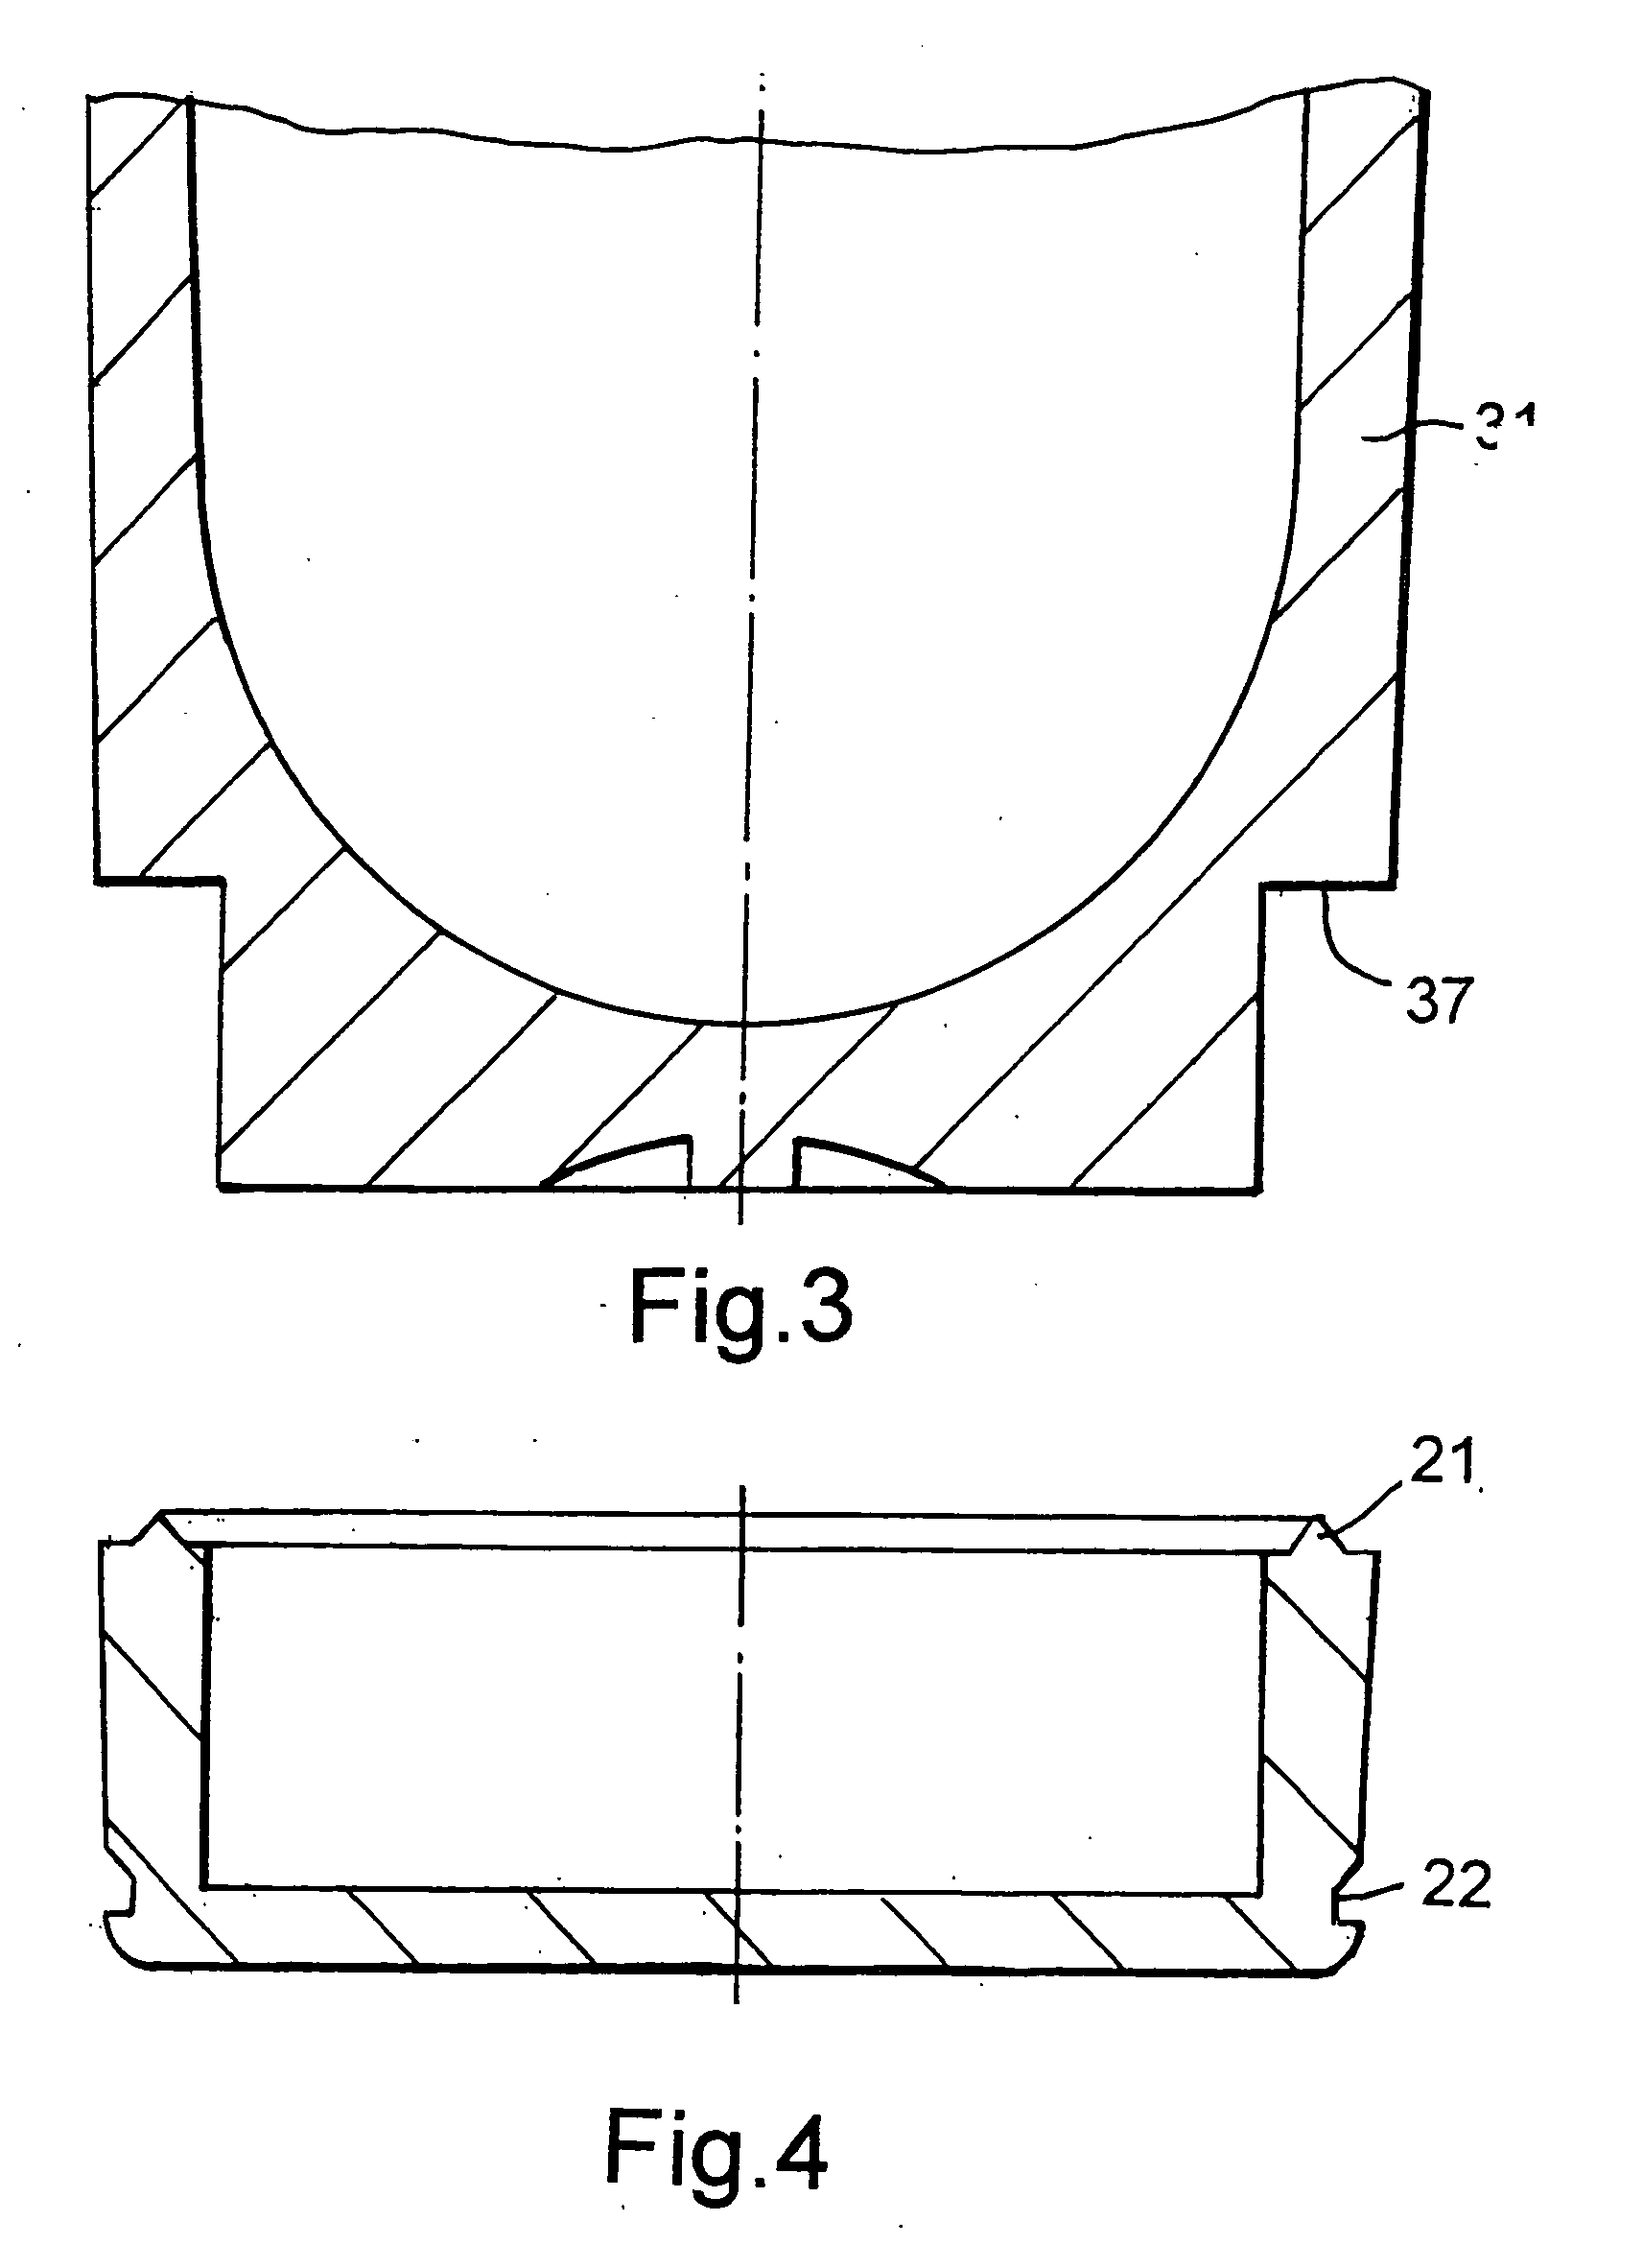 Sample tube assemblies and methods of constructing such sample tube assemblies